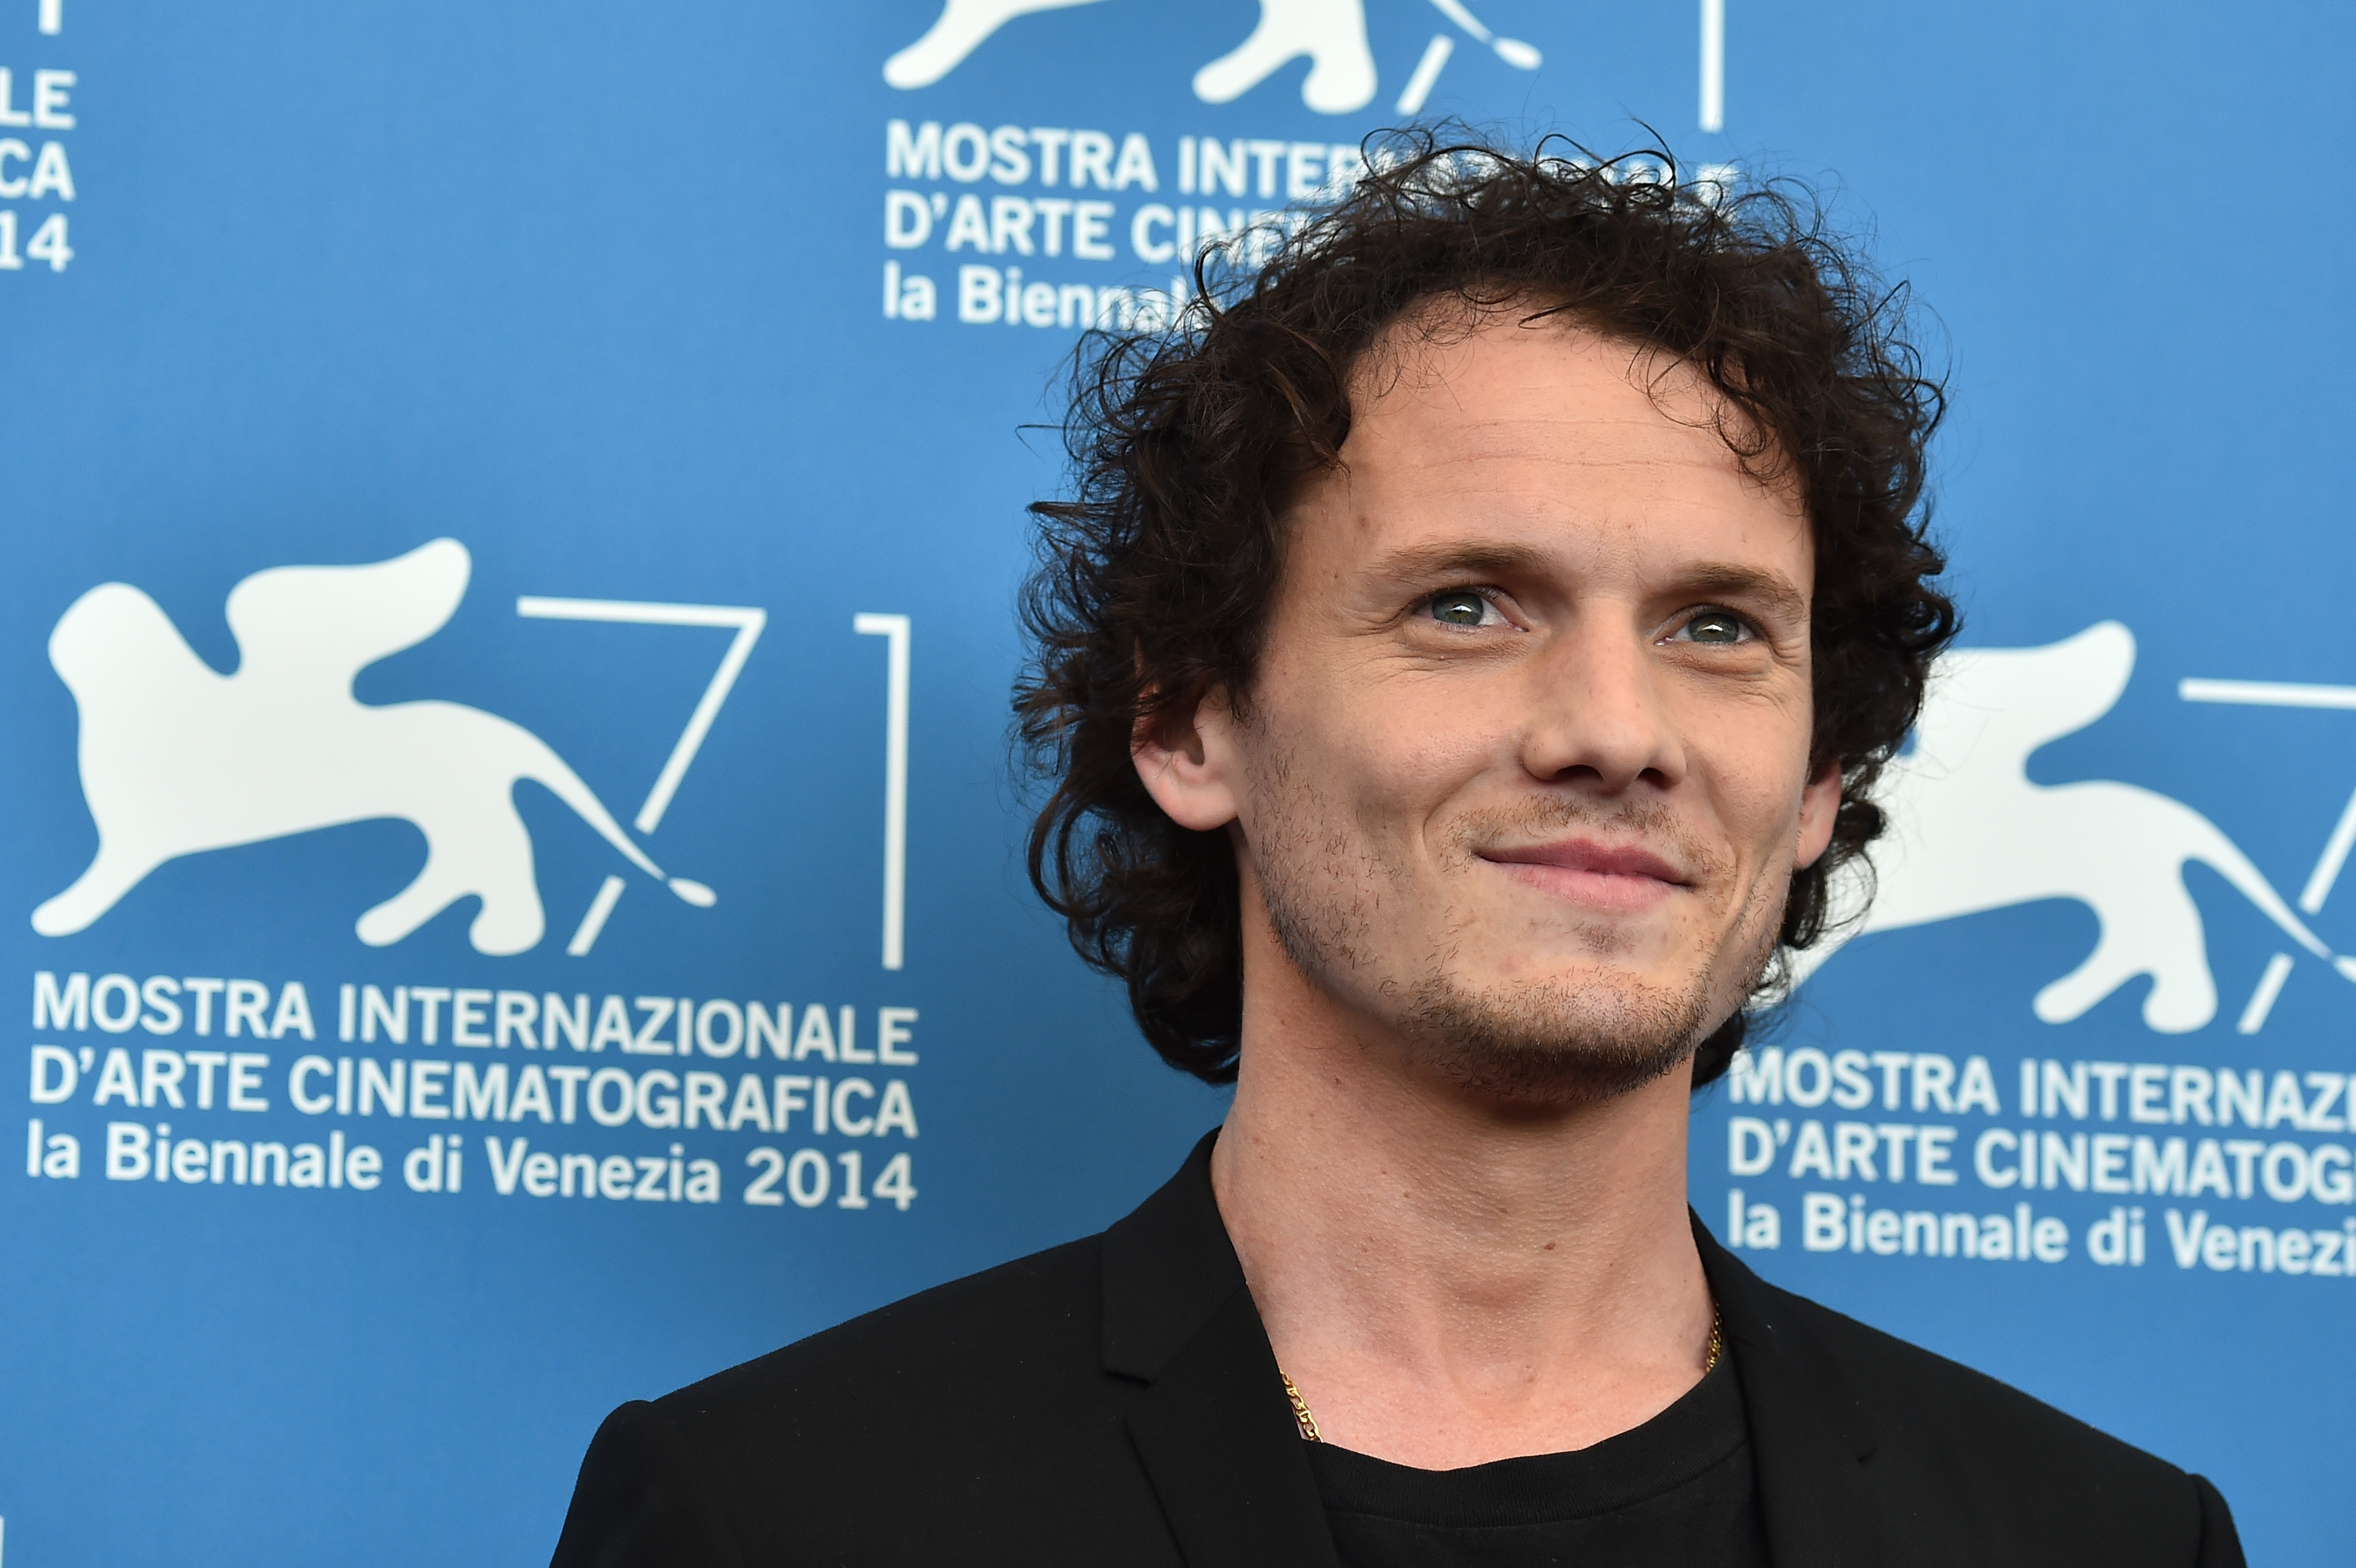 Actor Anton Yelchin poses during the photocall of the movie "Cymbeline" presented in the Orizzonti selection at the 71st Venice Film Festival on September 3, 2014 at Venice Lido.      AFP PHOTO / GABRIEL BOUYS / AFP PHOTO / GABRIEL BOUYS